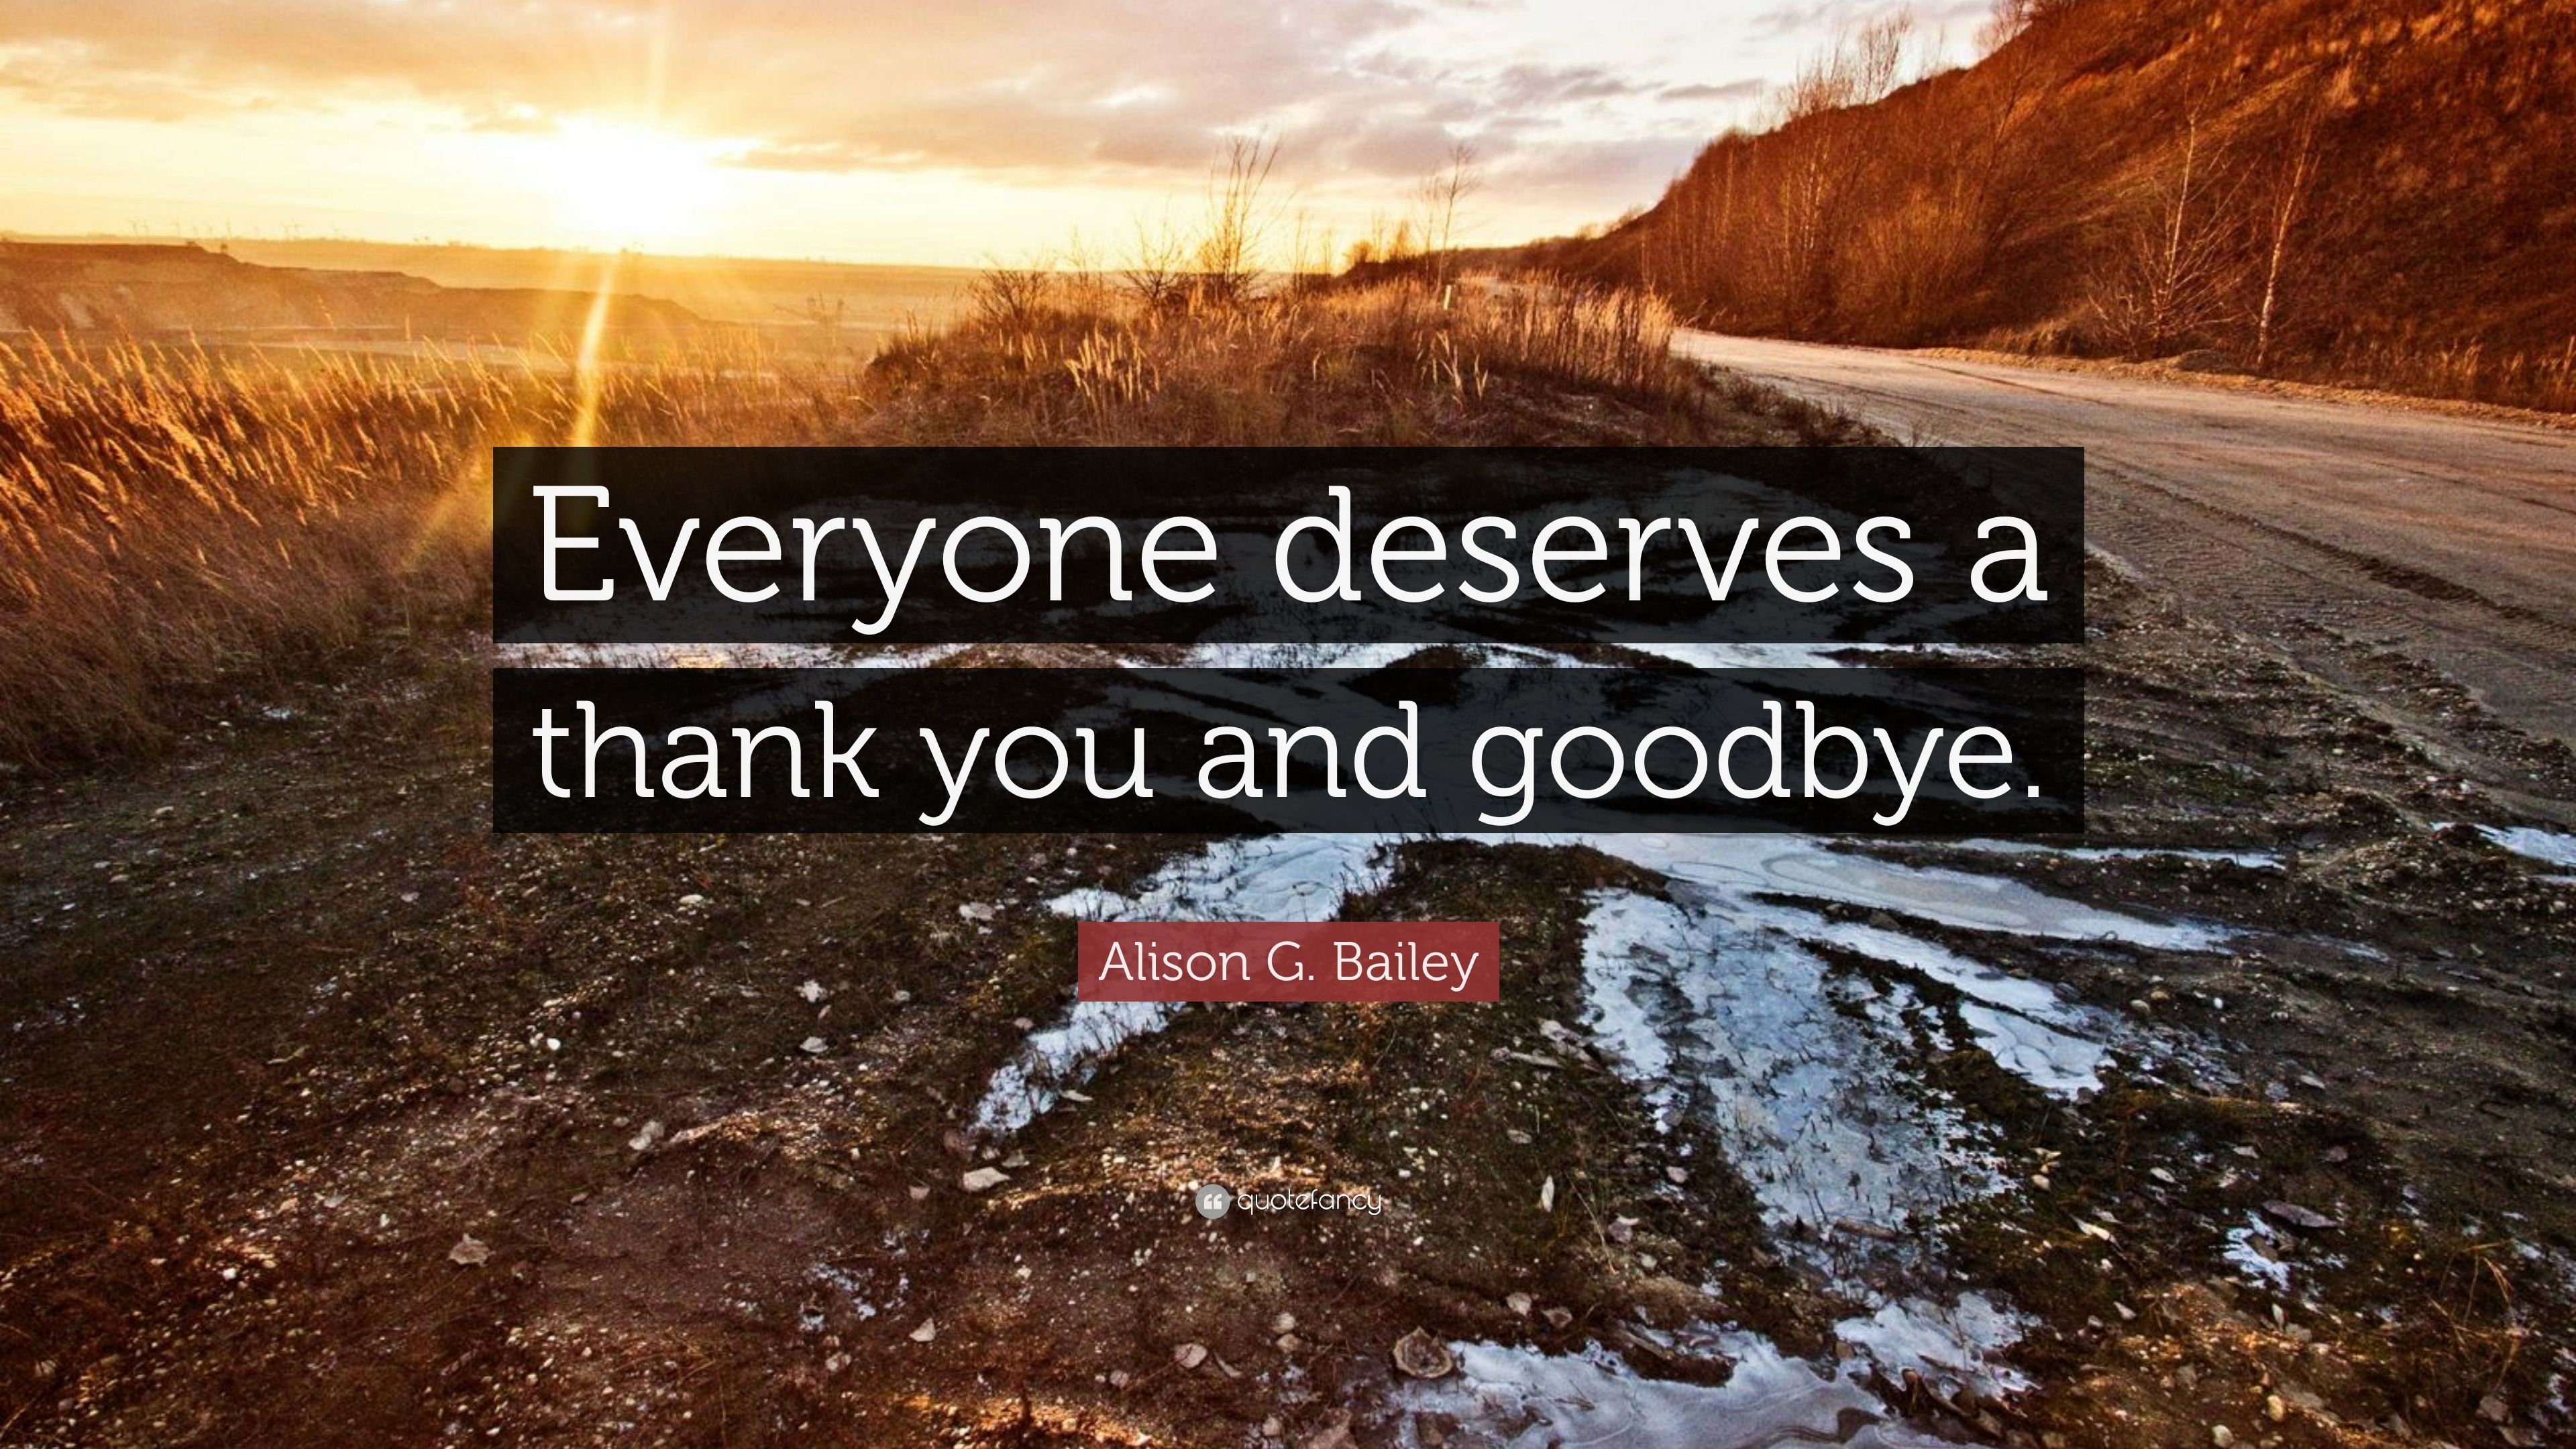 Alison G. Bailey Quote: “Everyone deserves a thank you and goodbye